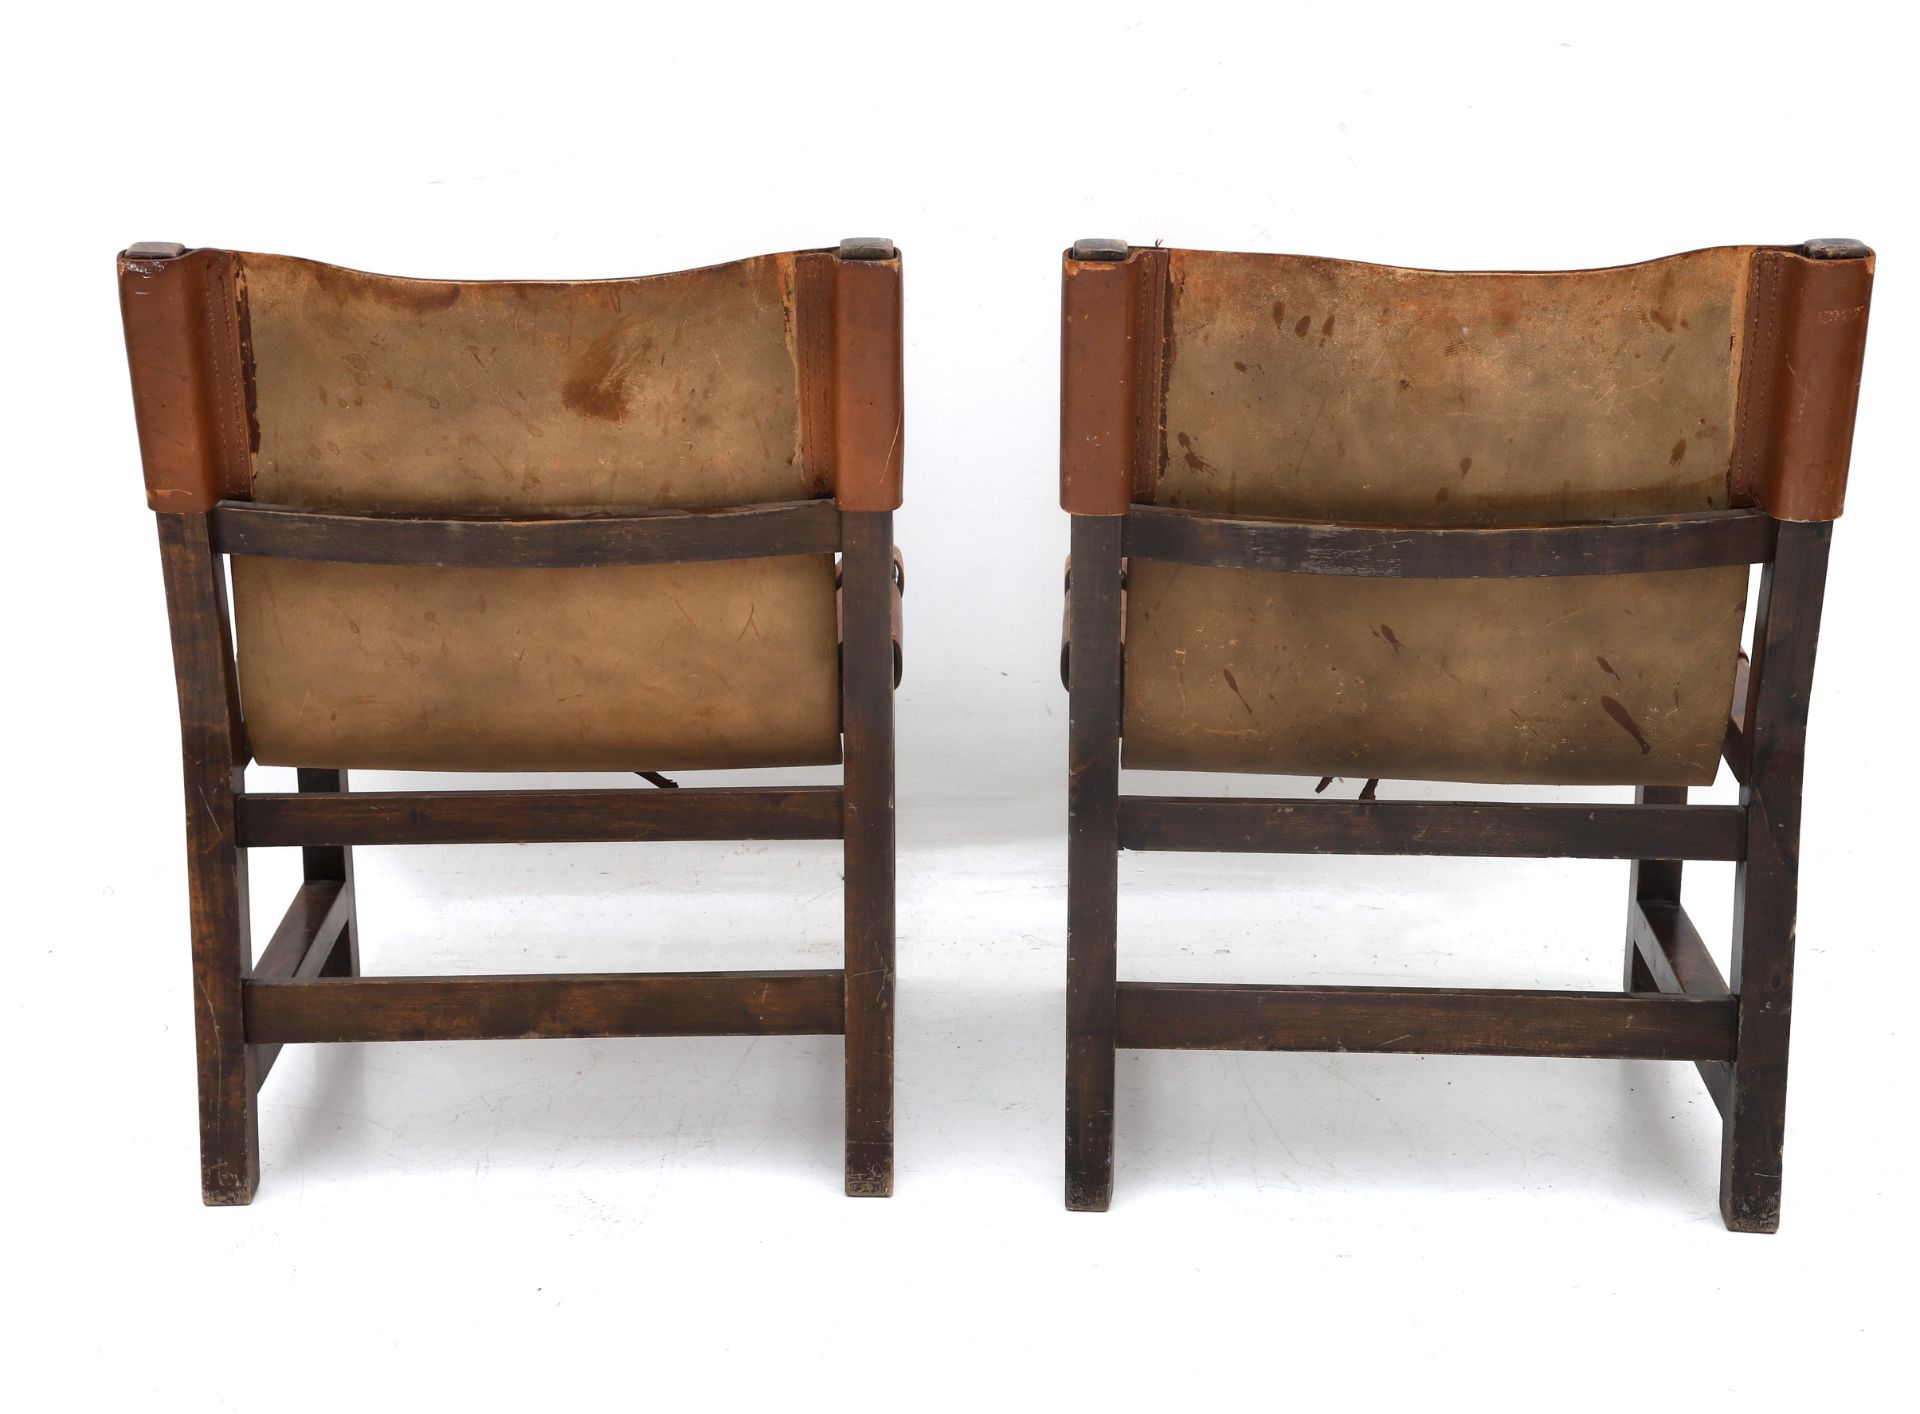 Paco Muñoz (1929-2009) Three Spanish lacquered wooden armchairs with brown saddle leather seats, - Bild 3 aus 3